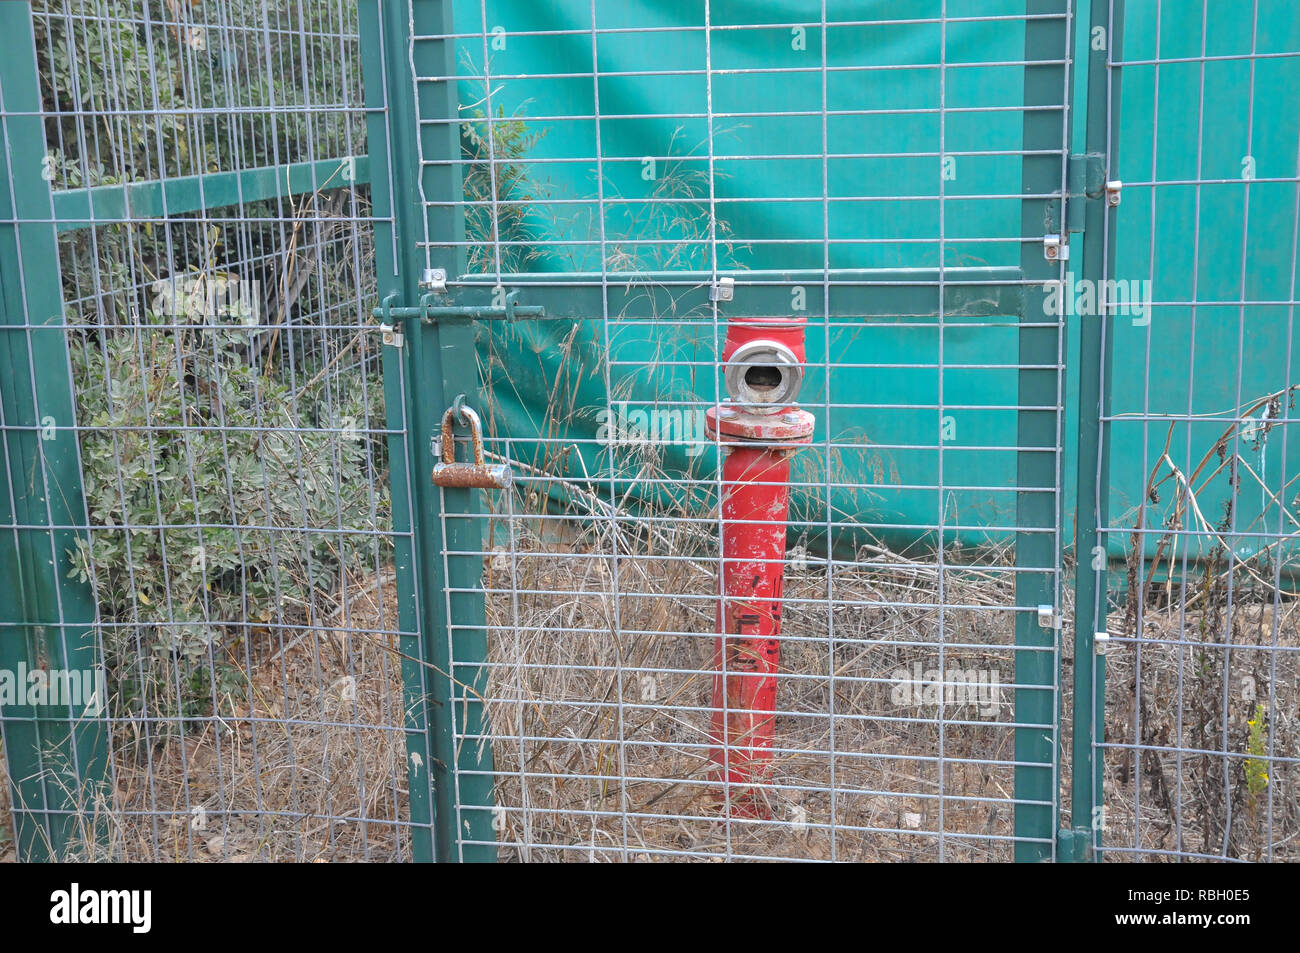 fire hydrant locked in a cage Hamasrek (Comb) Nature reserve is a forest located in the Jerusalem Hills, Israel Stock Photo